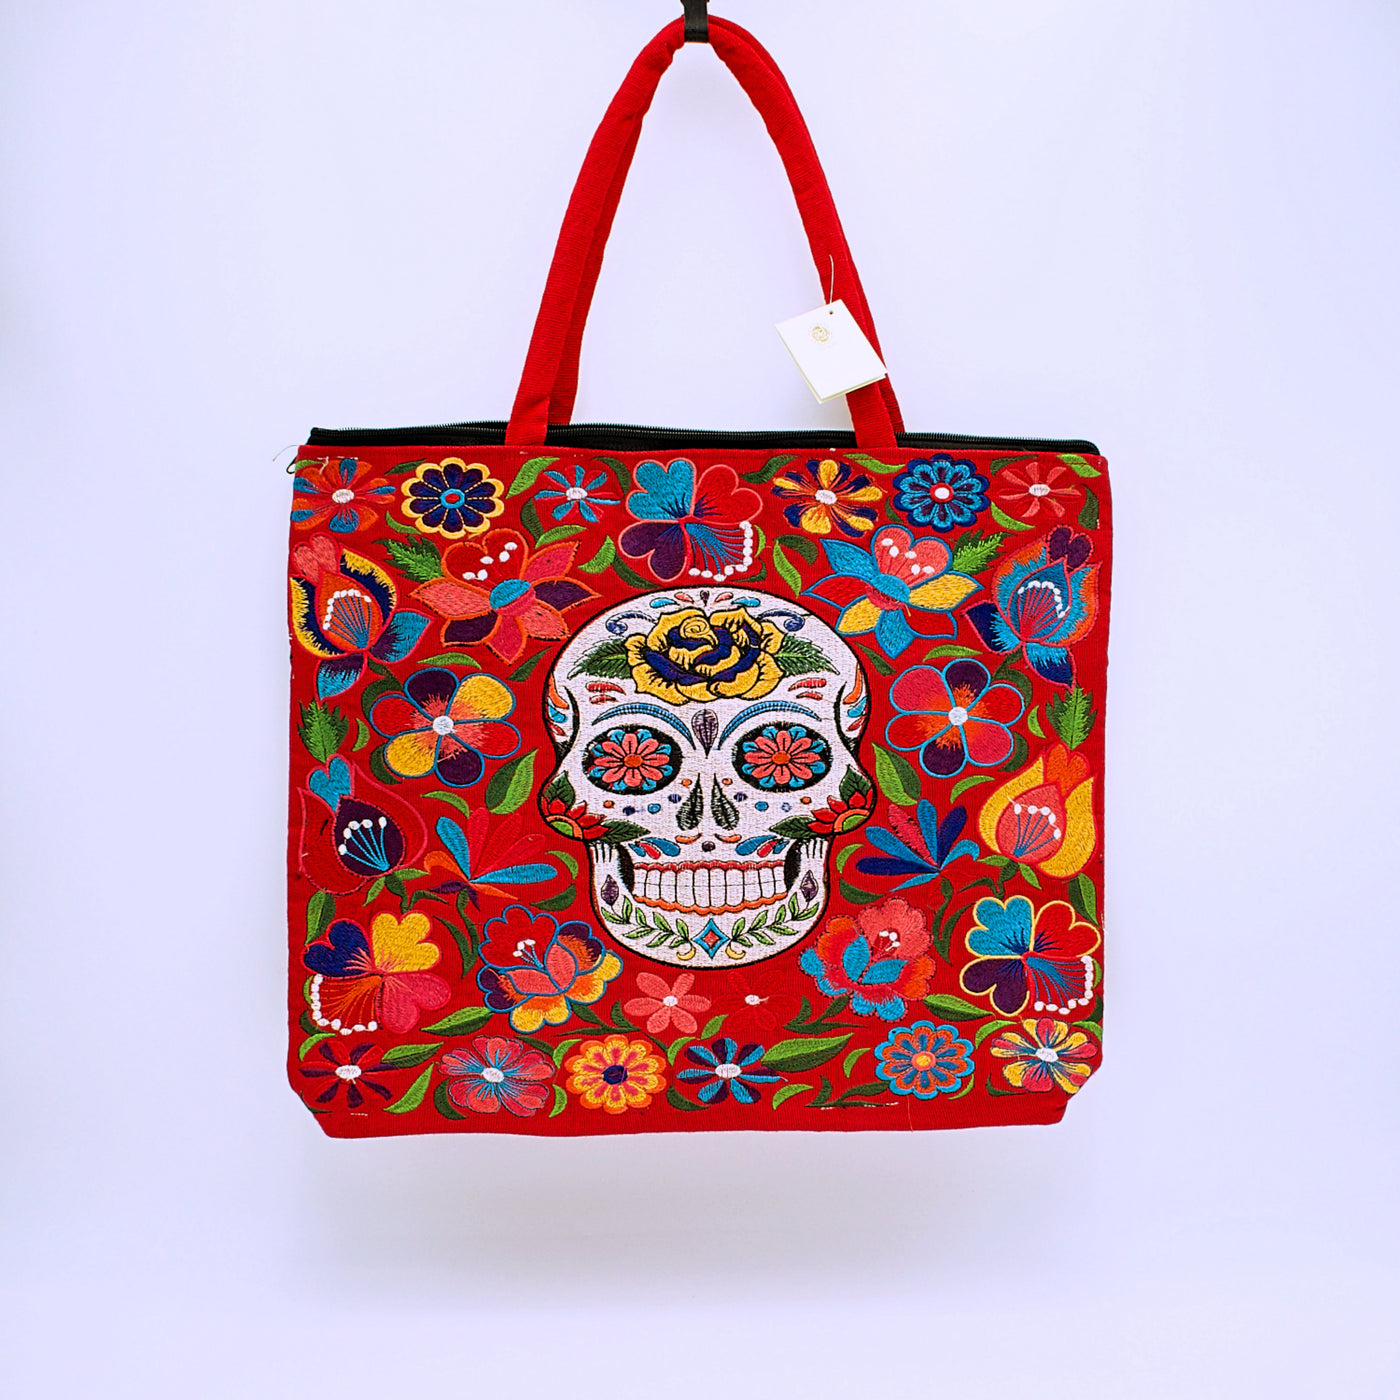 Embroidered Sugar Skull Zippered Cotton Tote Bag - The Cranio Collections